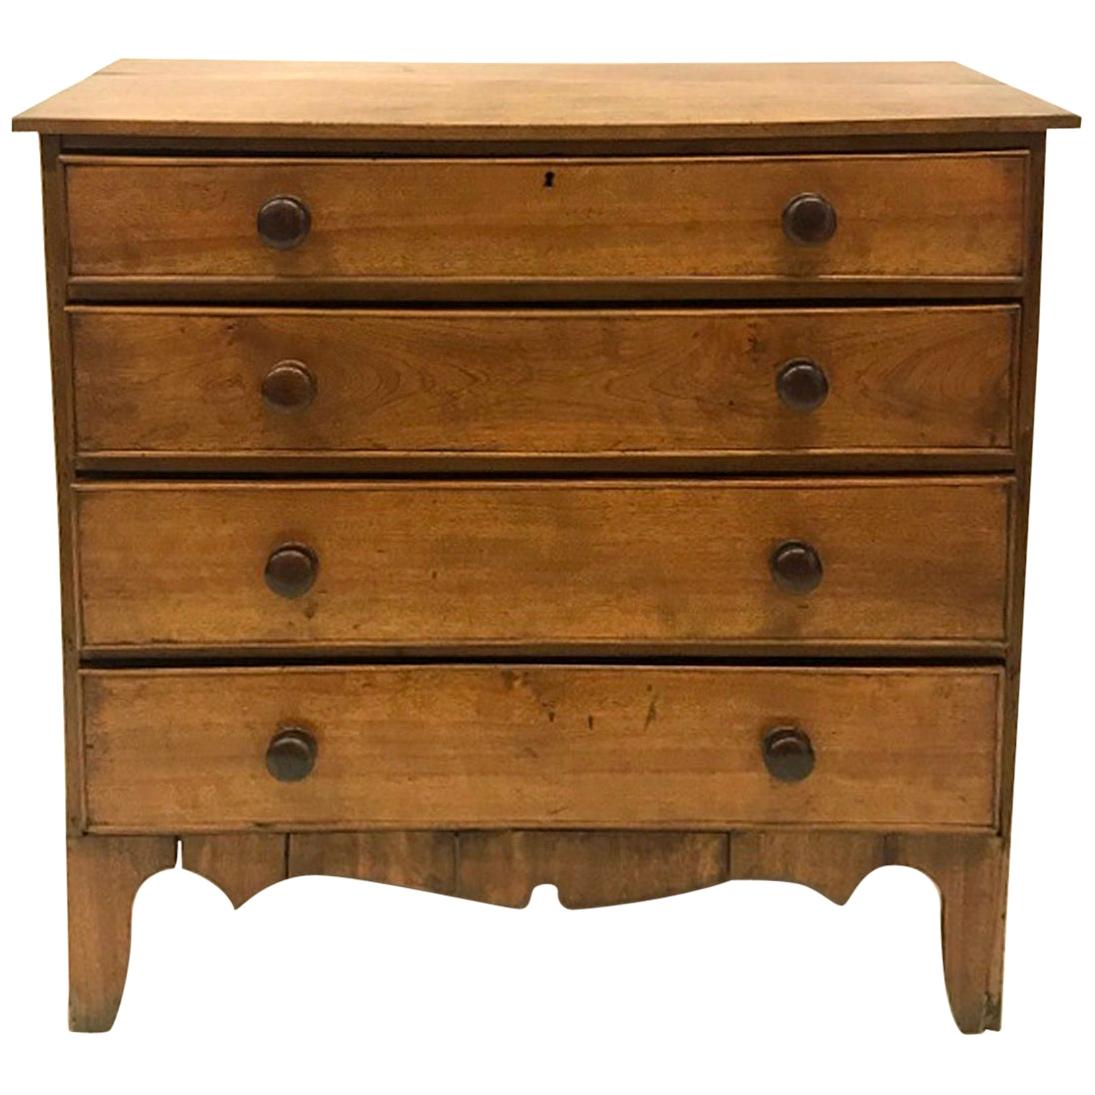 Country Hepplewhite Chest of Drawers